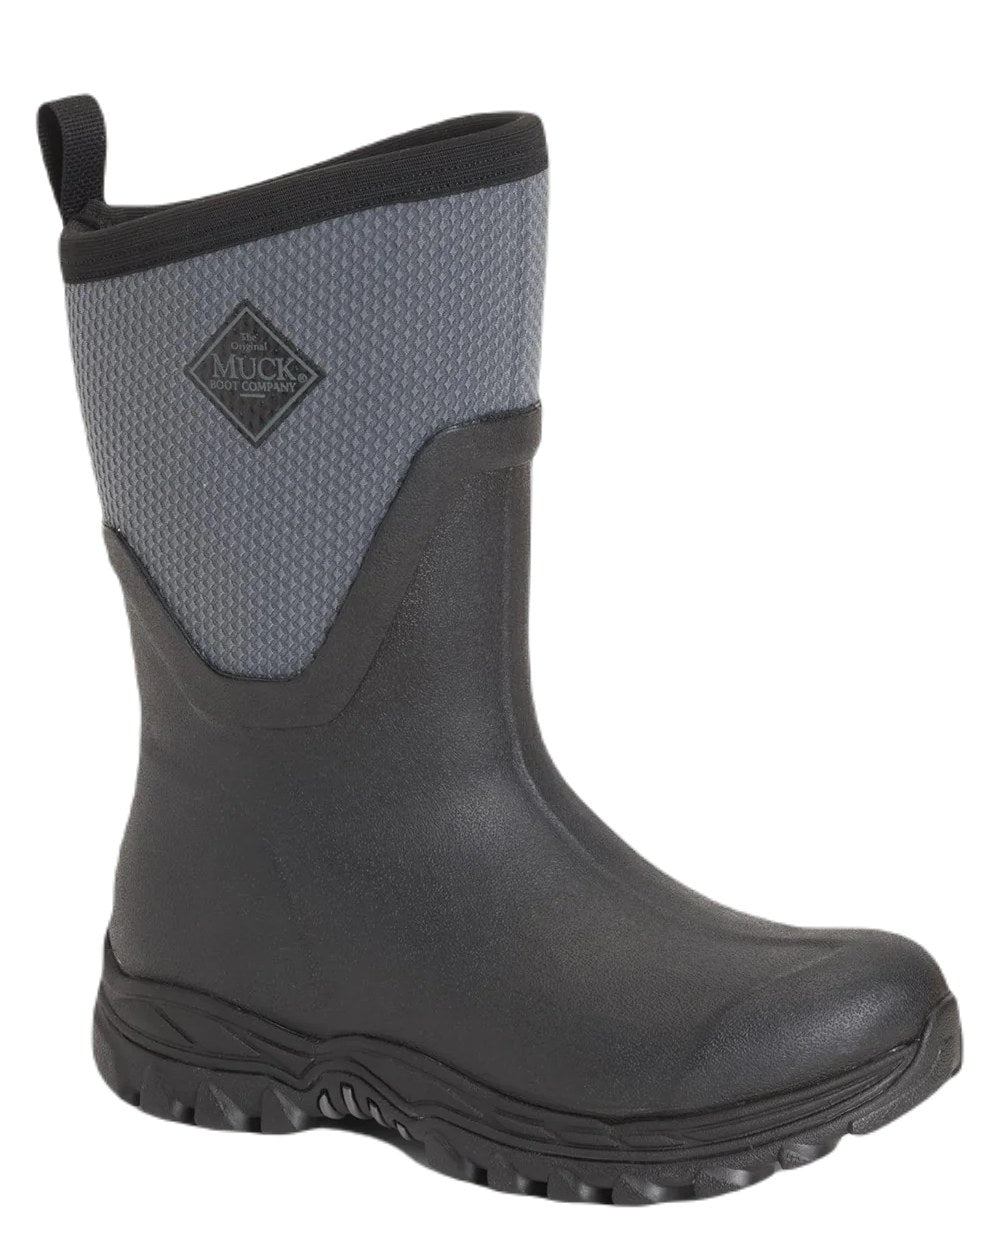 Black Grey Coloured Muck Boots Womens Arctic Sport II Mid Wellingtons On A White Background 